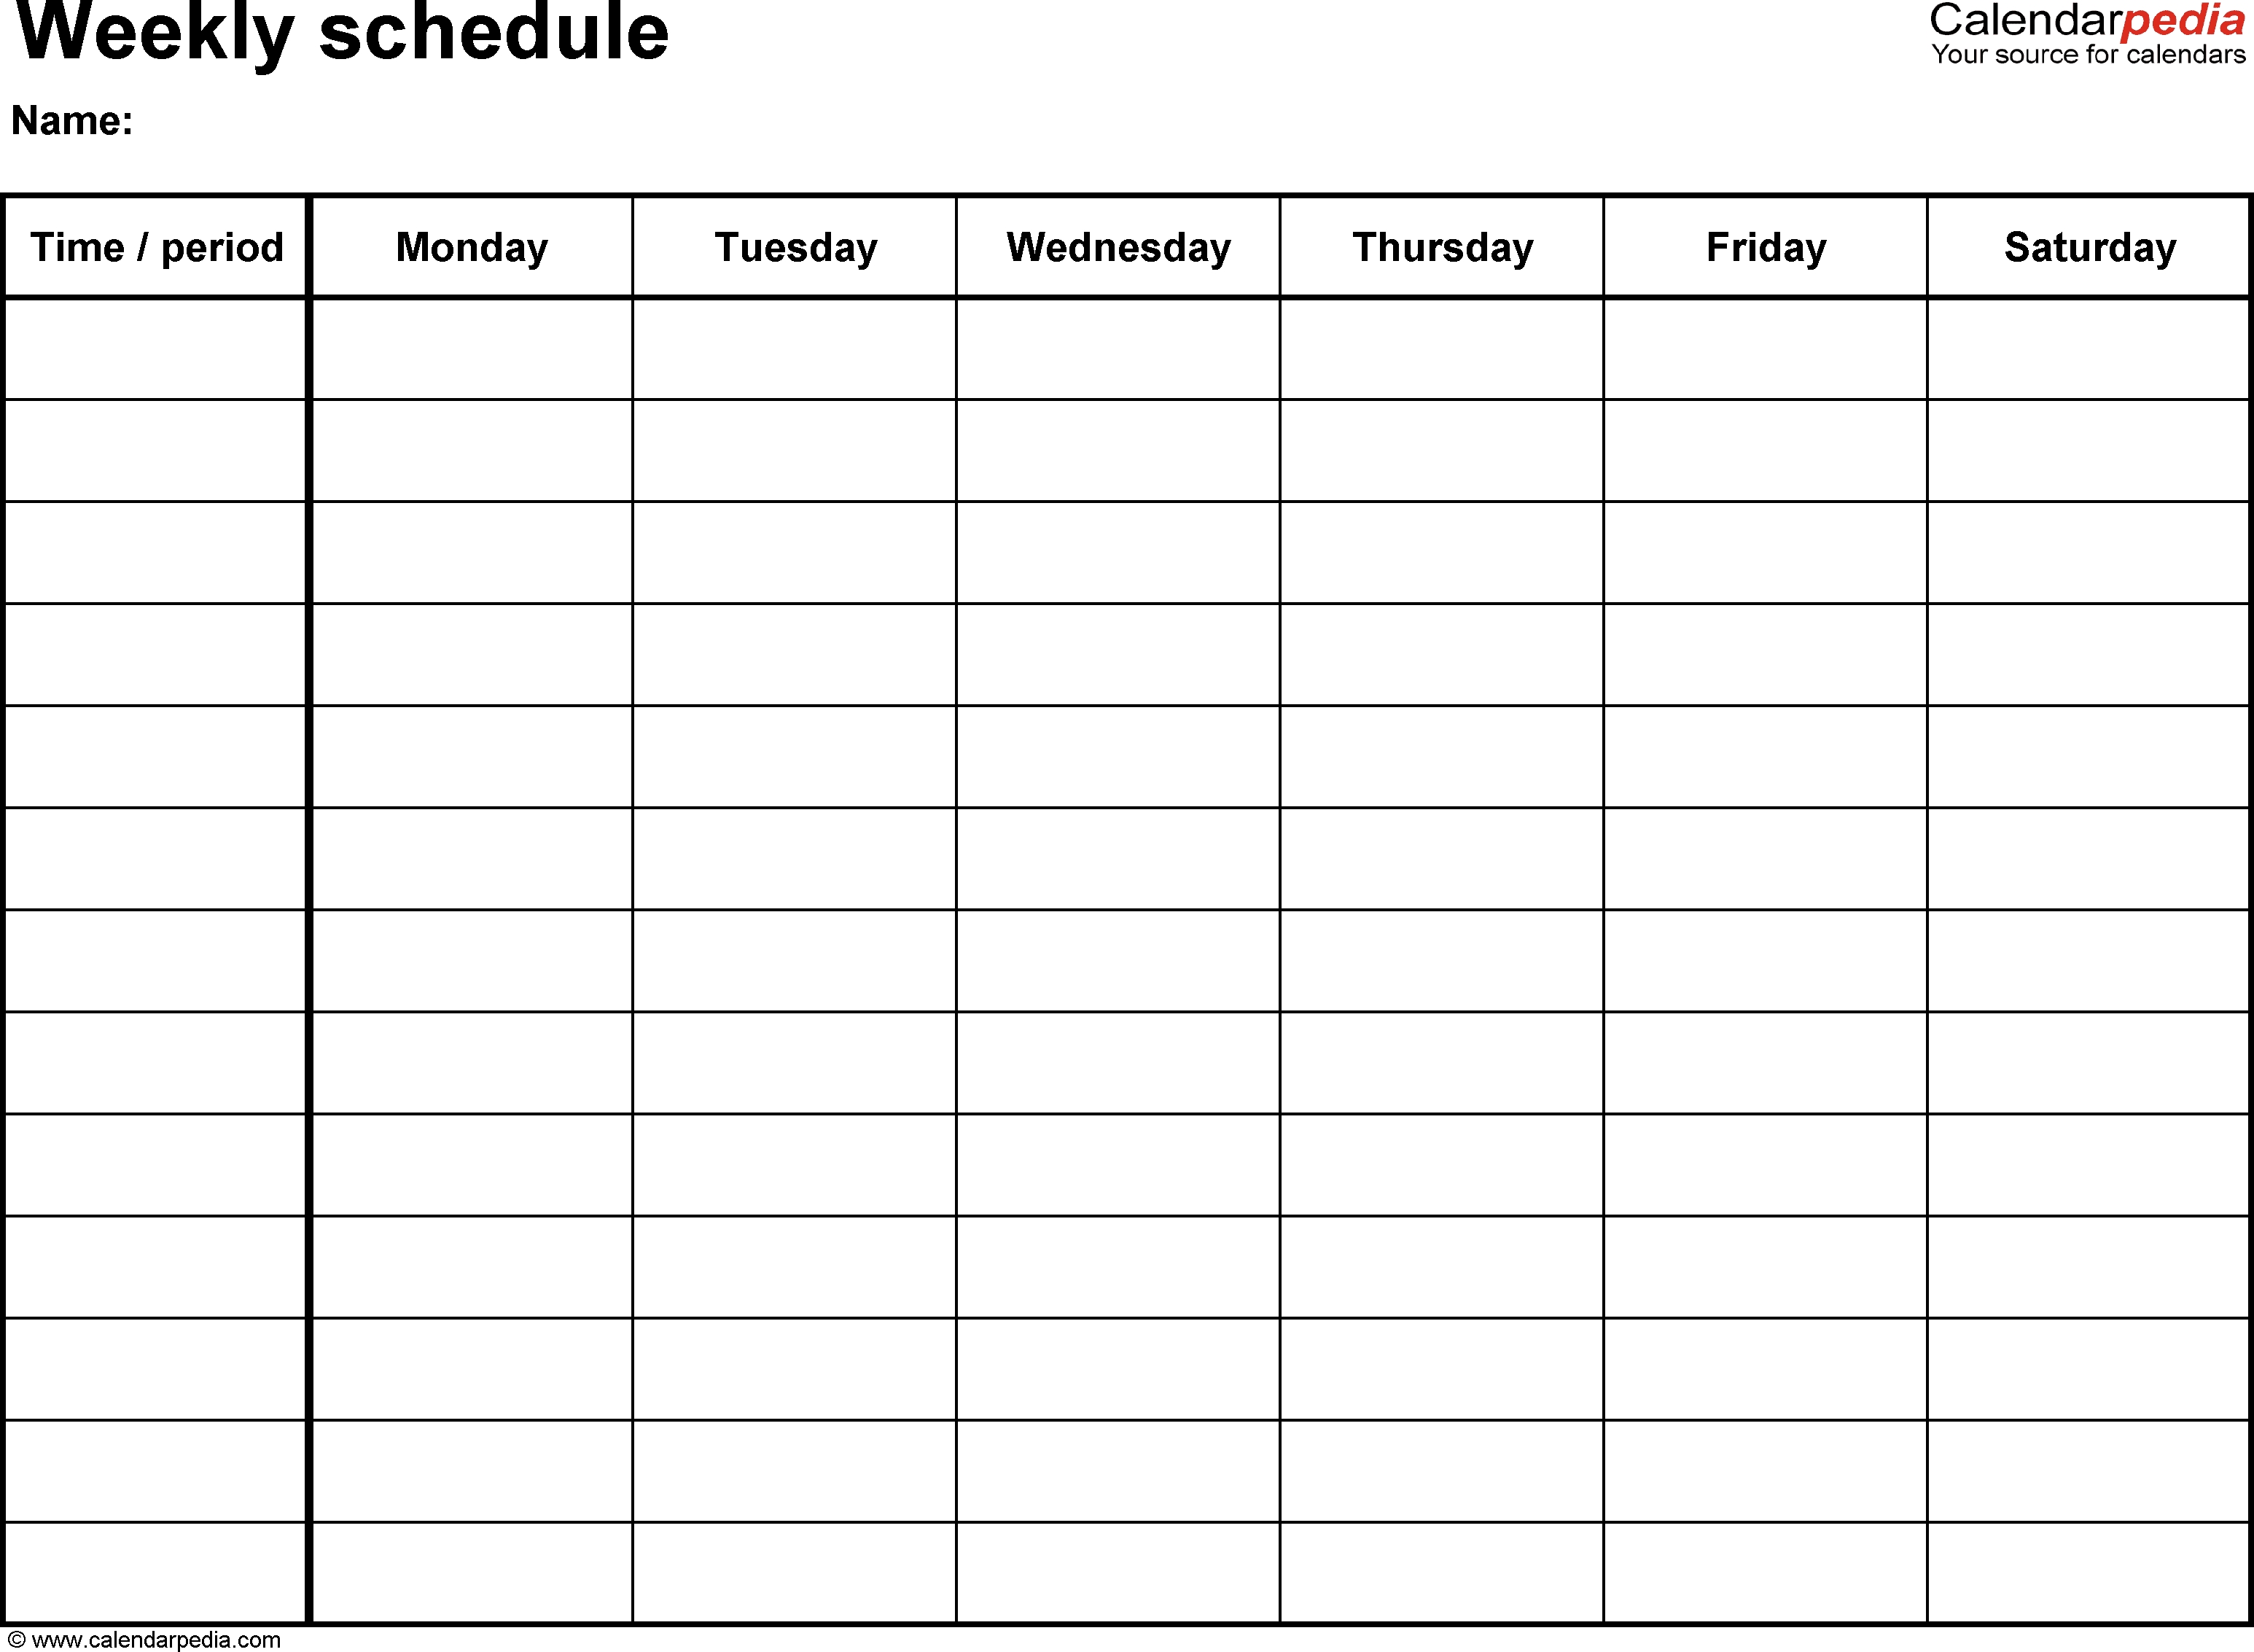 Free Weekly Schedule Templates For Word - 18 Templates with Weekly Schedule Monday Through Friday